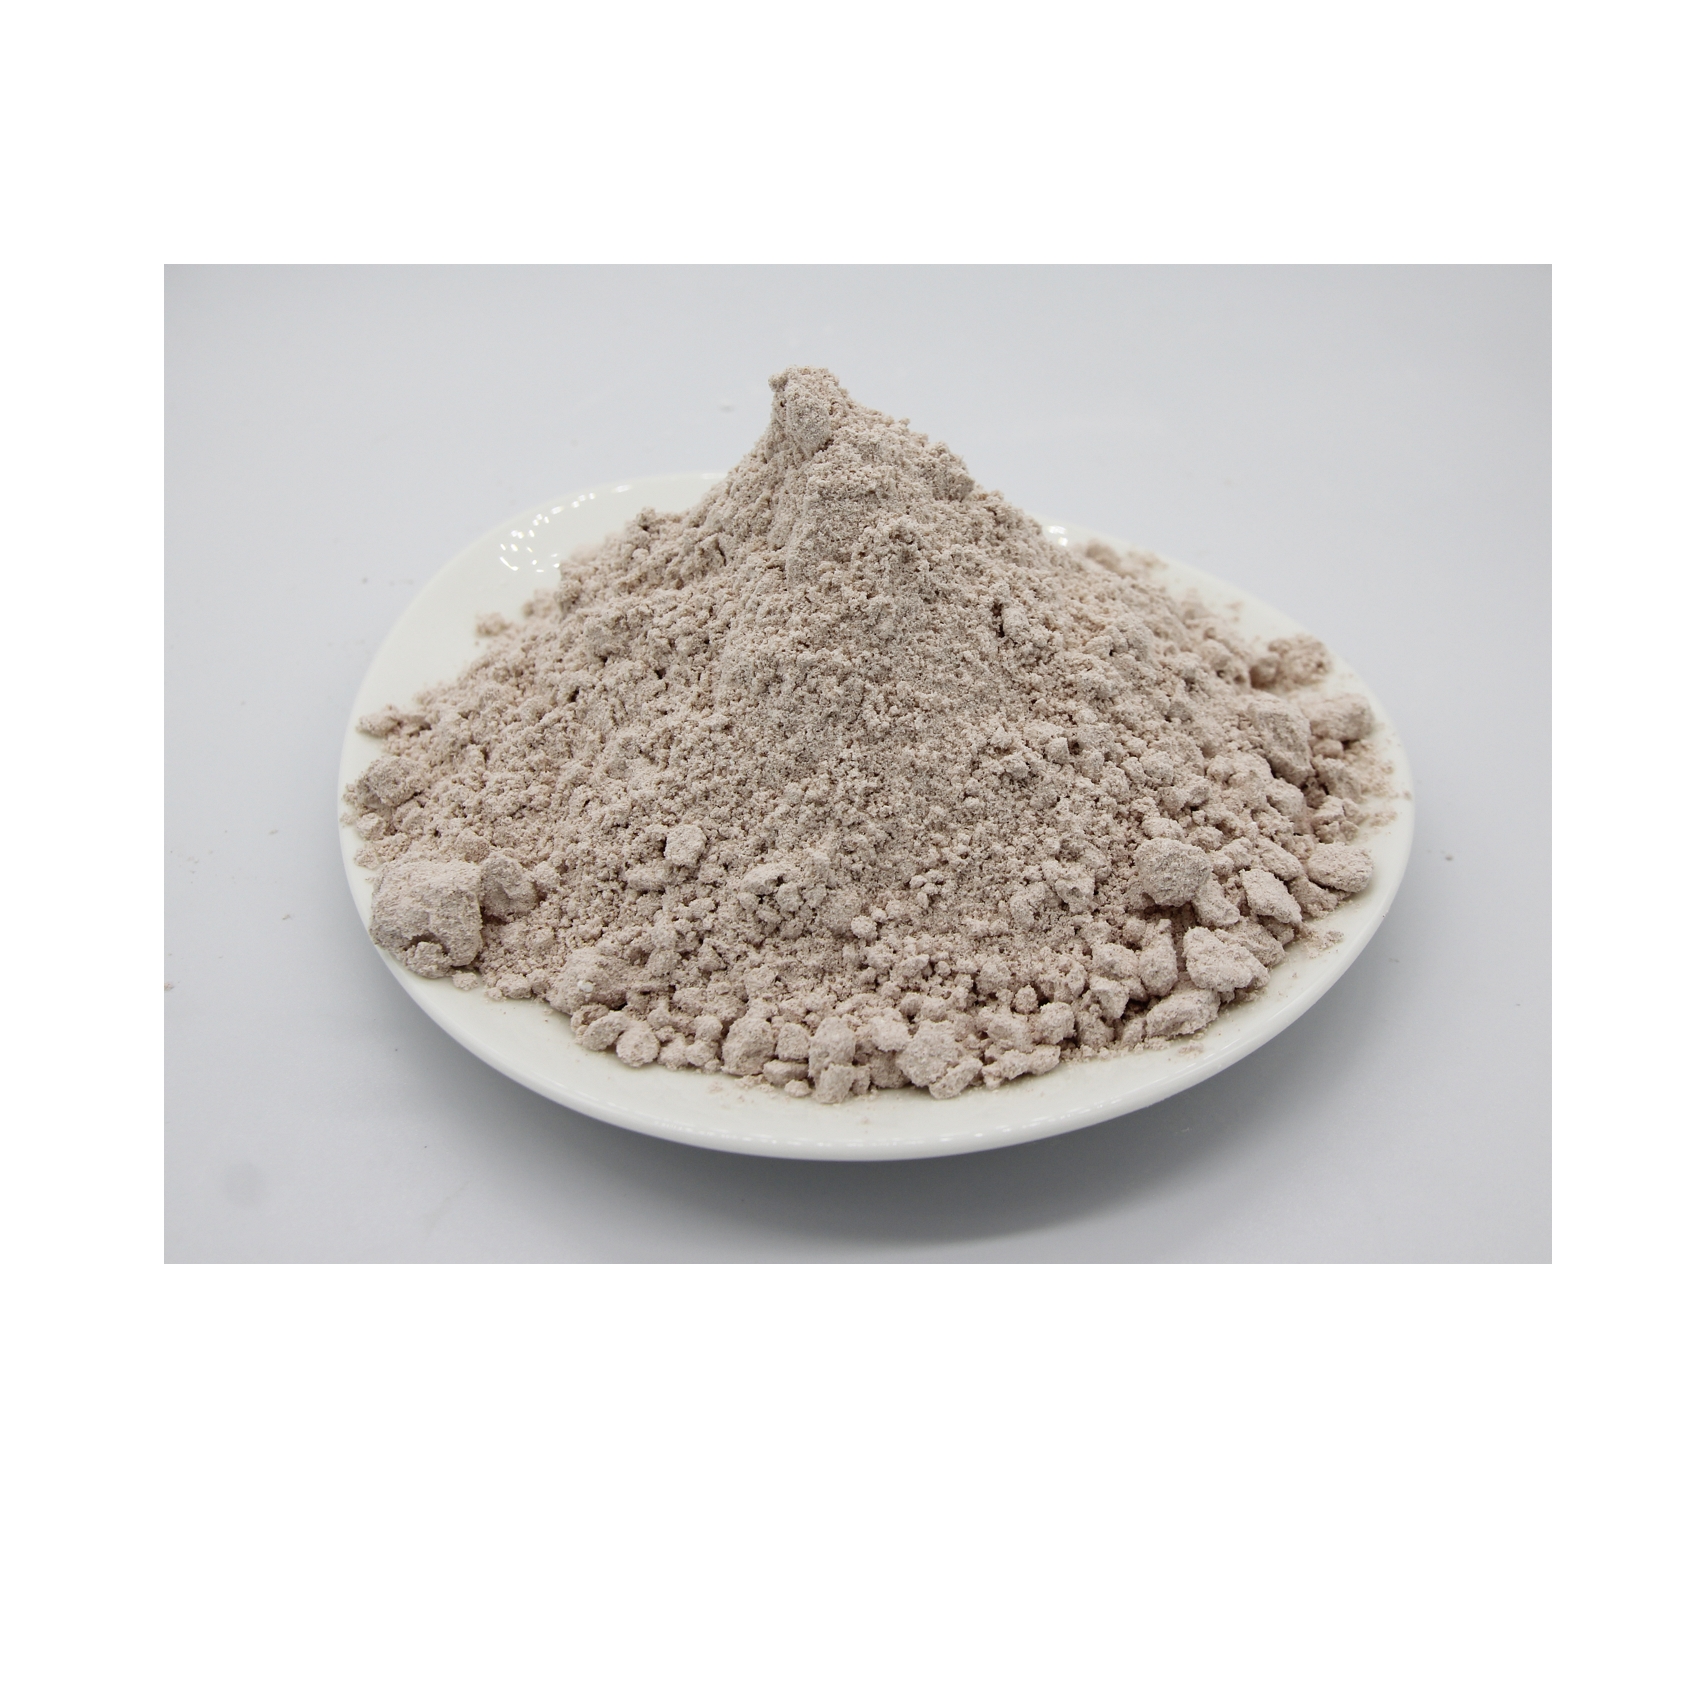 Wholesale High Quality Brown Rice Flour from Vietnam Best Supplier Contact us for Best Price